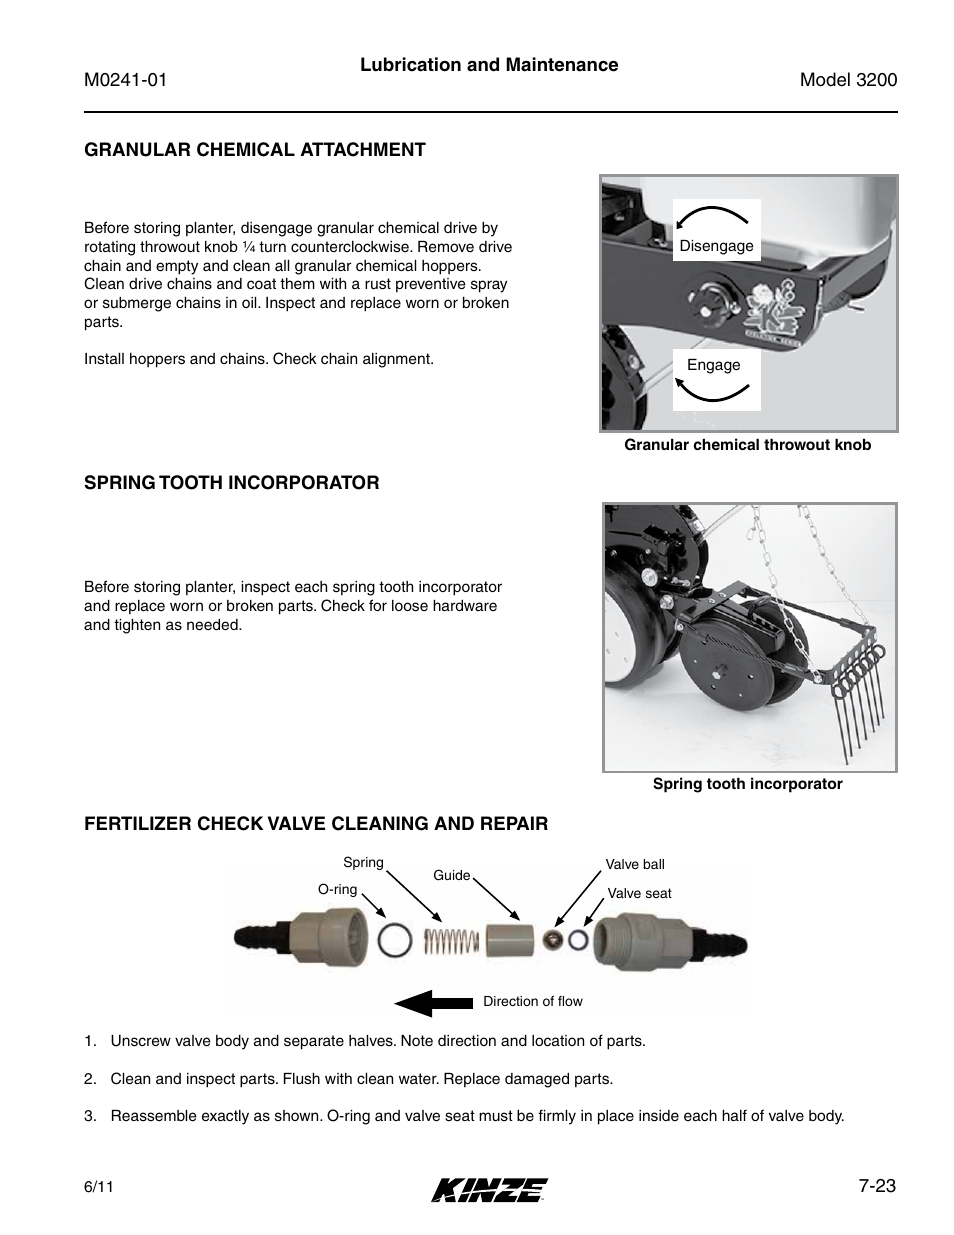 Granular chemical attachment, Spring tooth incorporator, Fertilizer check valve cleaning and repair | Granular chemical attachment -23, Spring tooth incorporator -23, Fertilizer check valve cleaning and repair -23 | Kinze 3200 Wing-Fold Planter Rev. 7/14 User Manual | Page 163 / 192